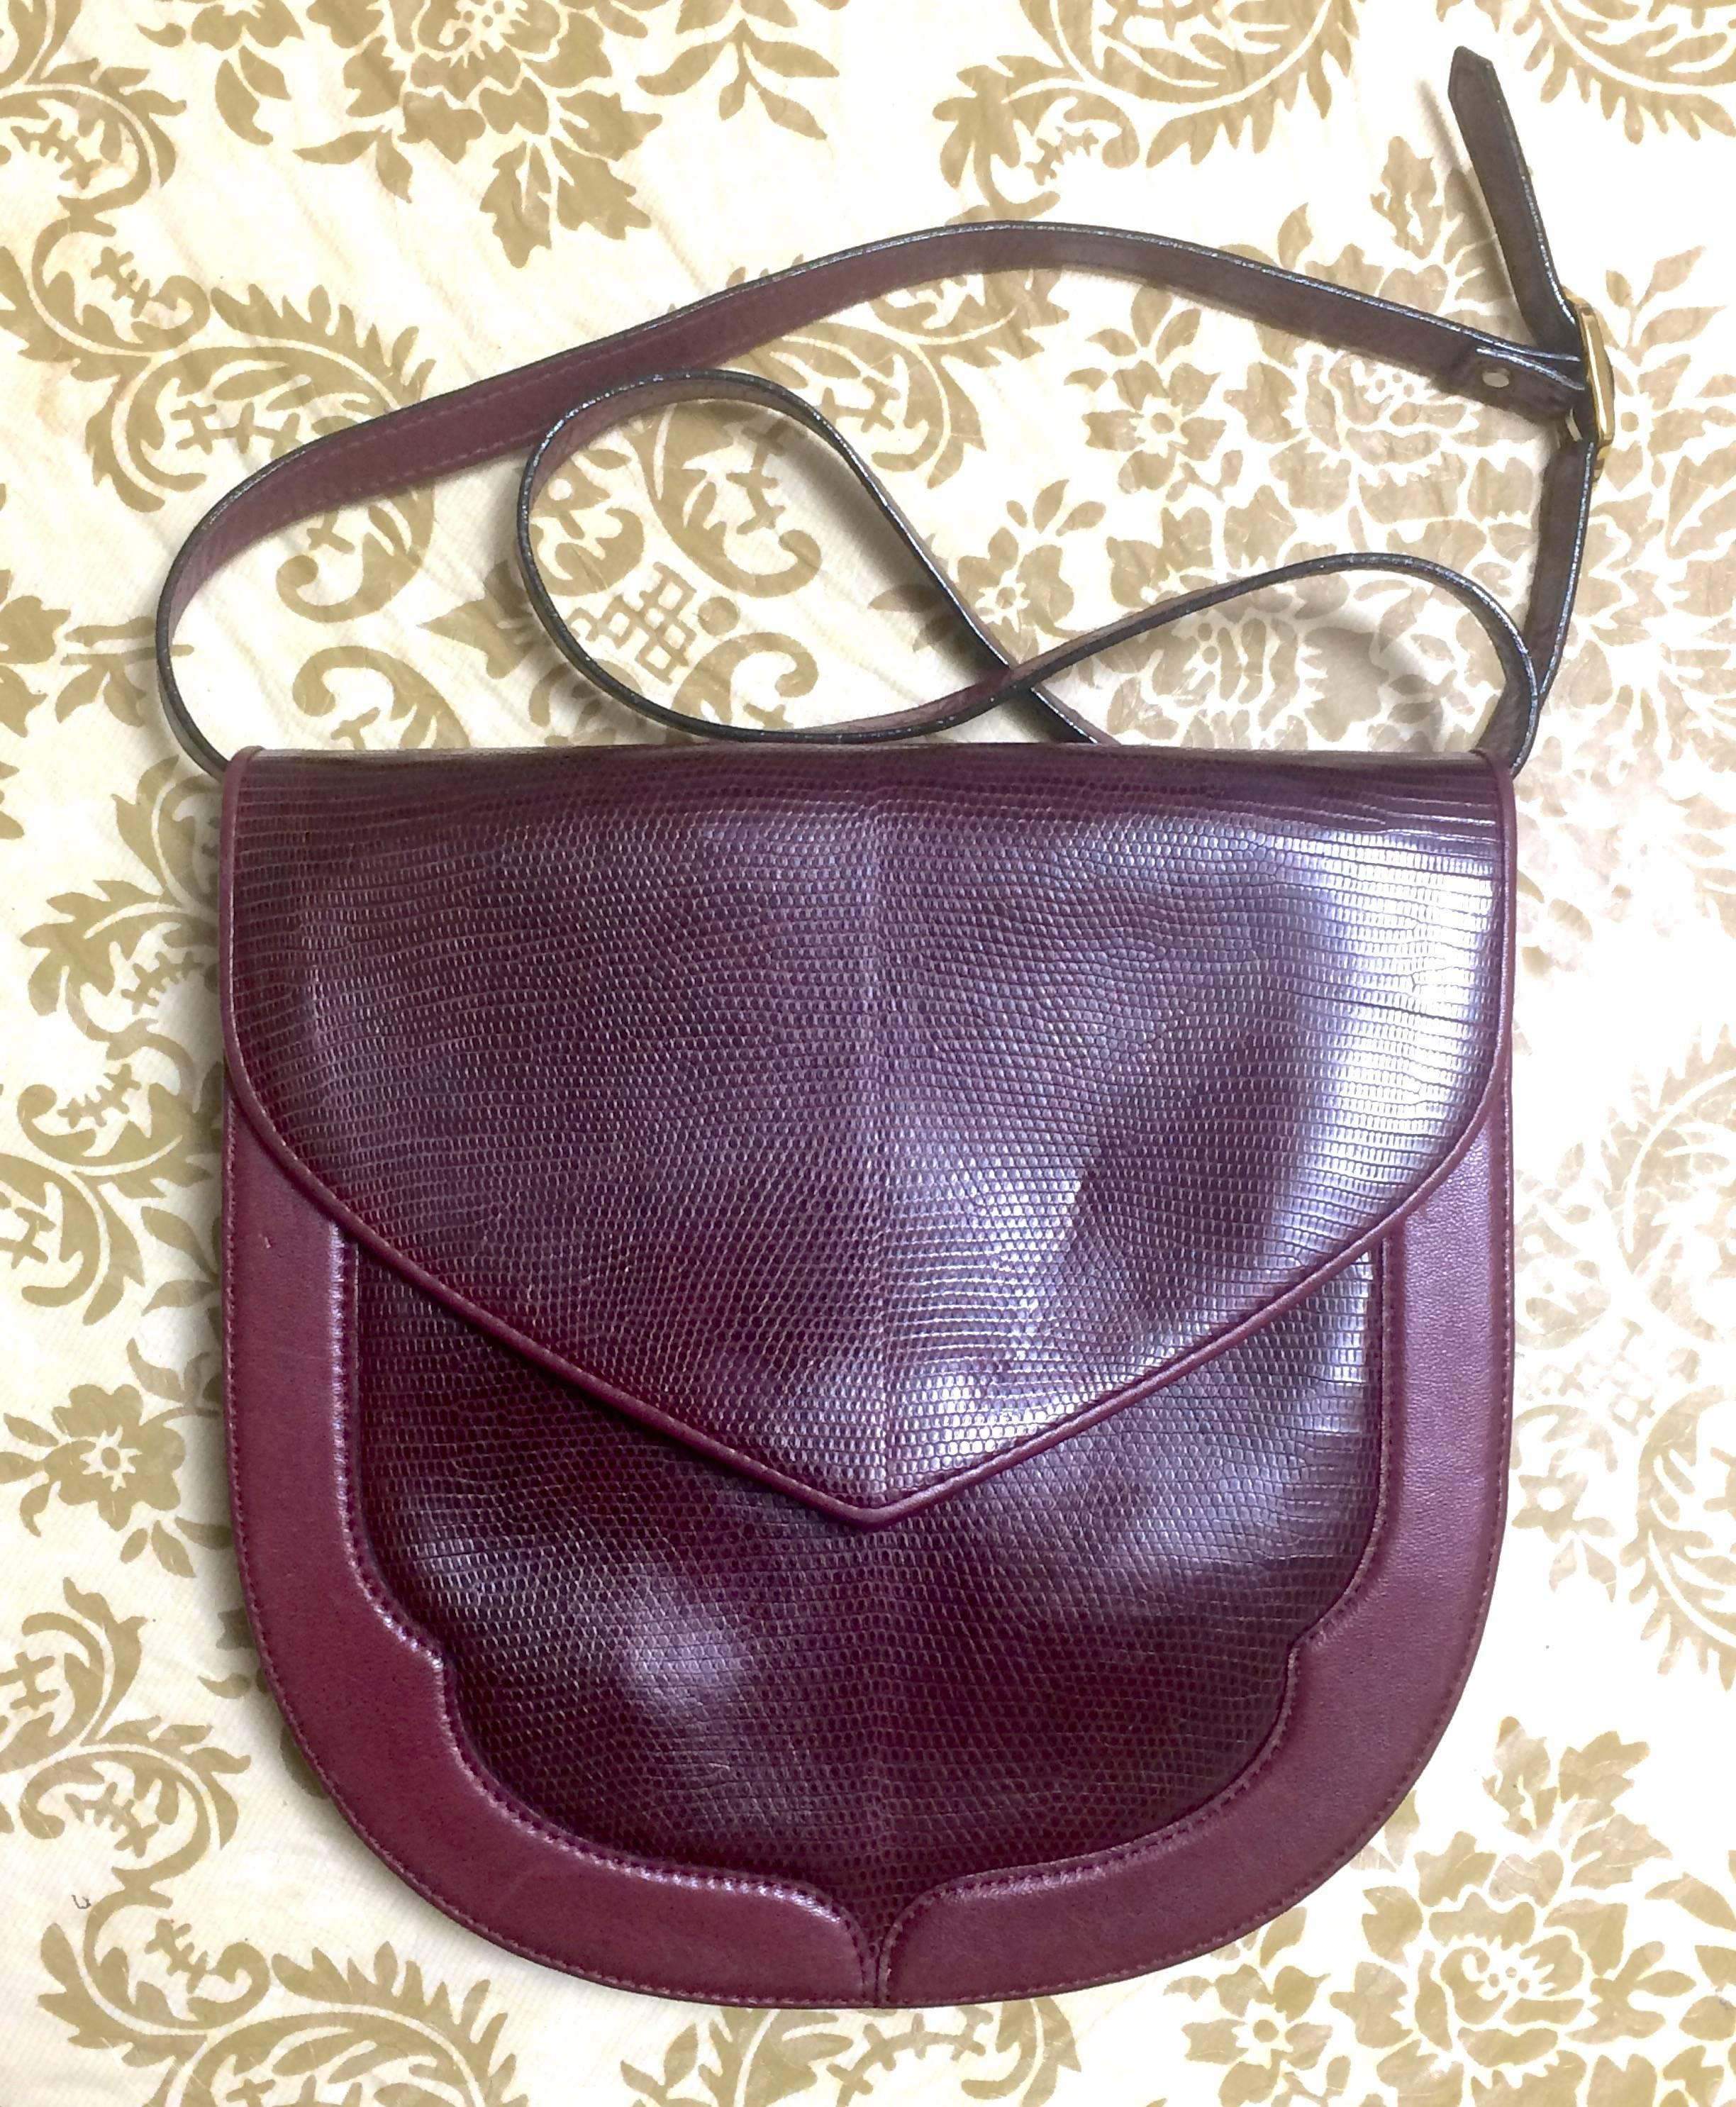 1980's Vintage Yves Saint Laurent wine red, bordeaux lizard and leather shoulder clutch bag with YSL logo interior linings.

This is a vintage shoulder purse from Yves Saint Laurent approx from the 80's.
You will love and use this unique form in